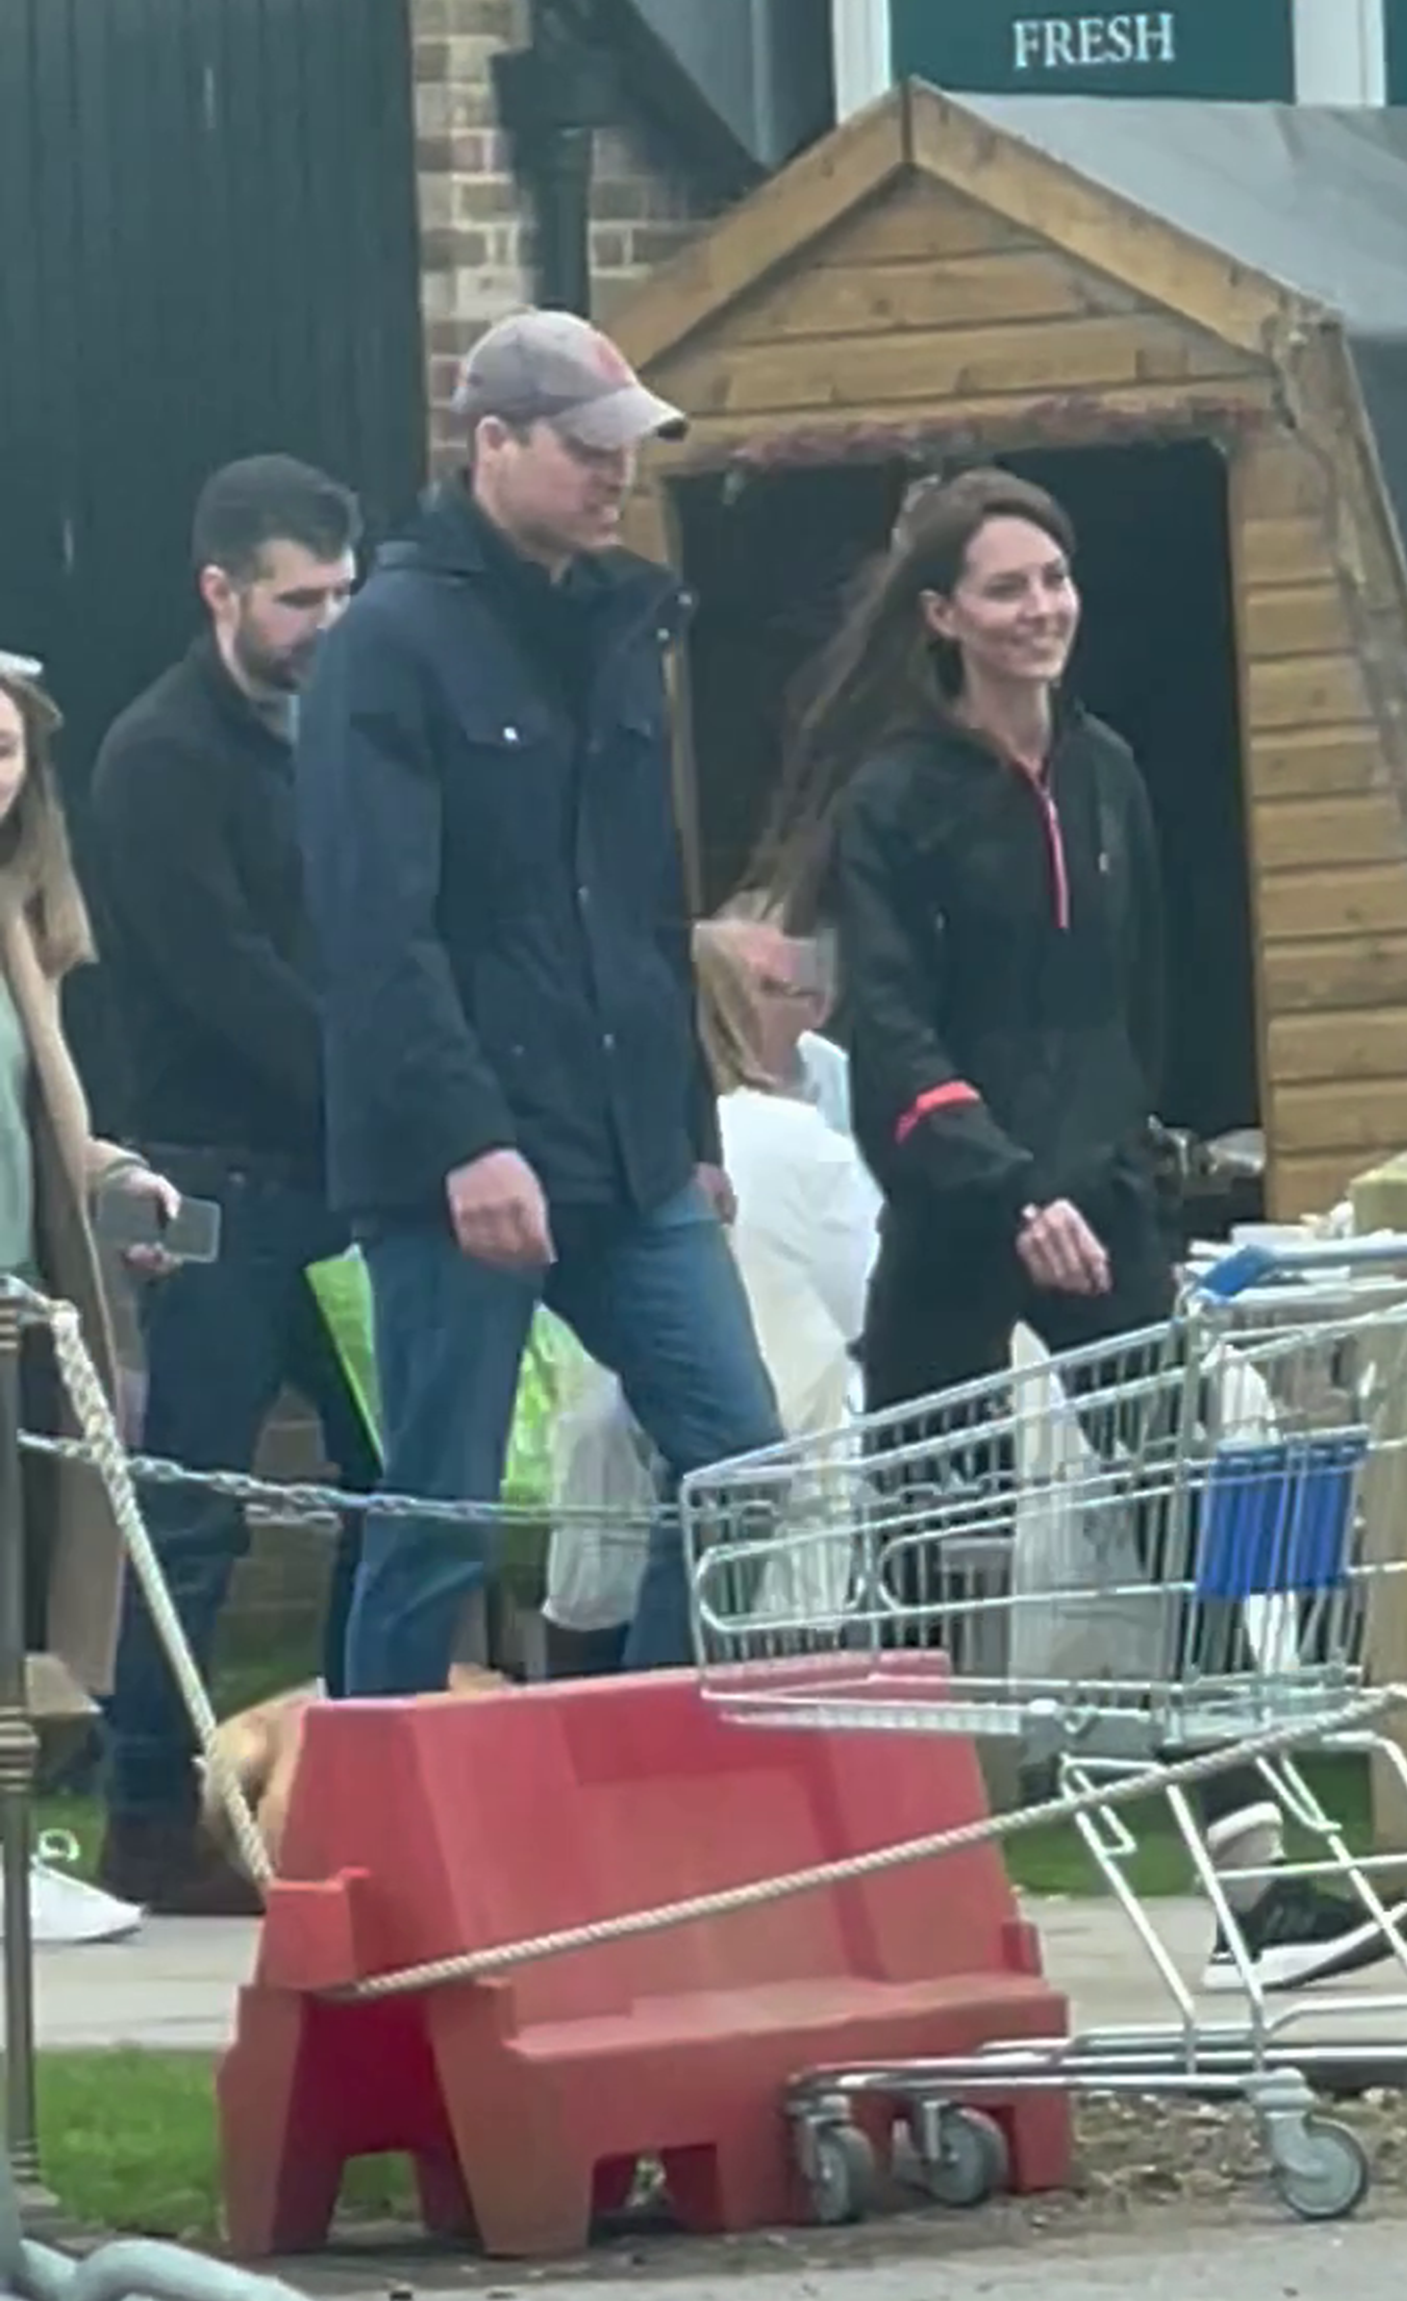 More conspiracy theories circulated after a video of Kate and William at Windsor Farm Shop emerged